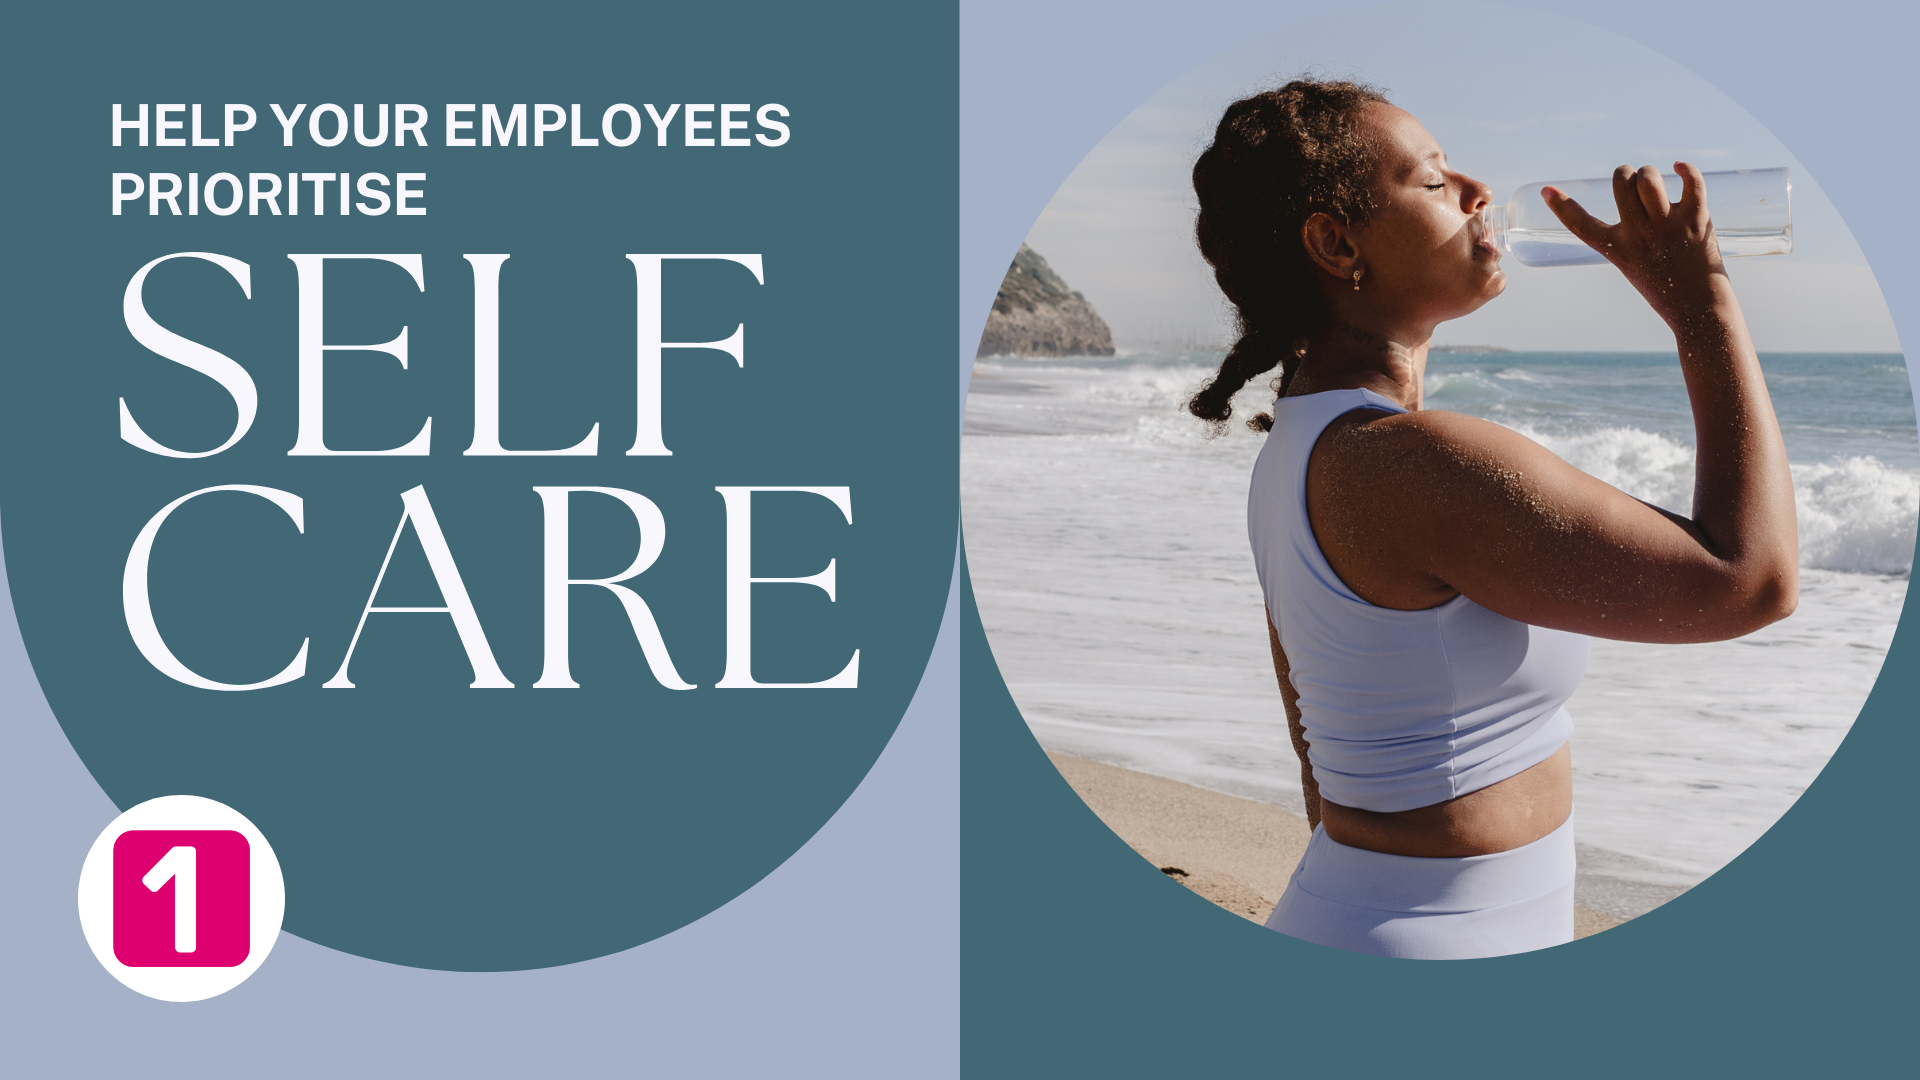 Help your employees prioritise self-care